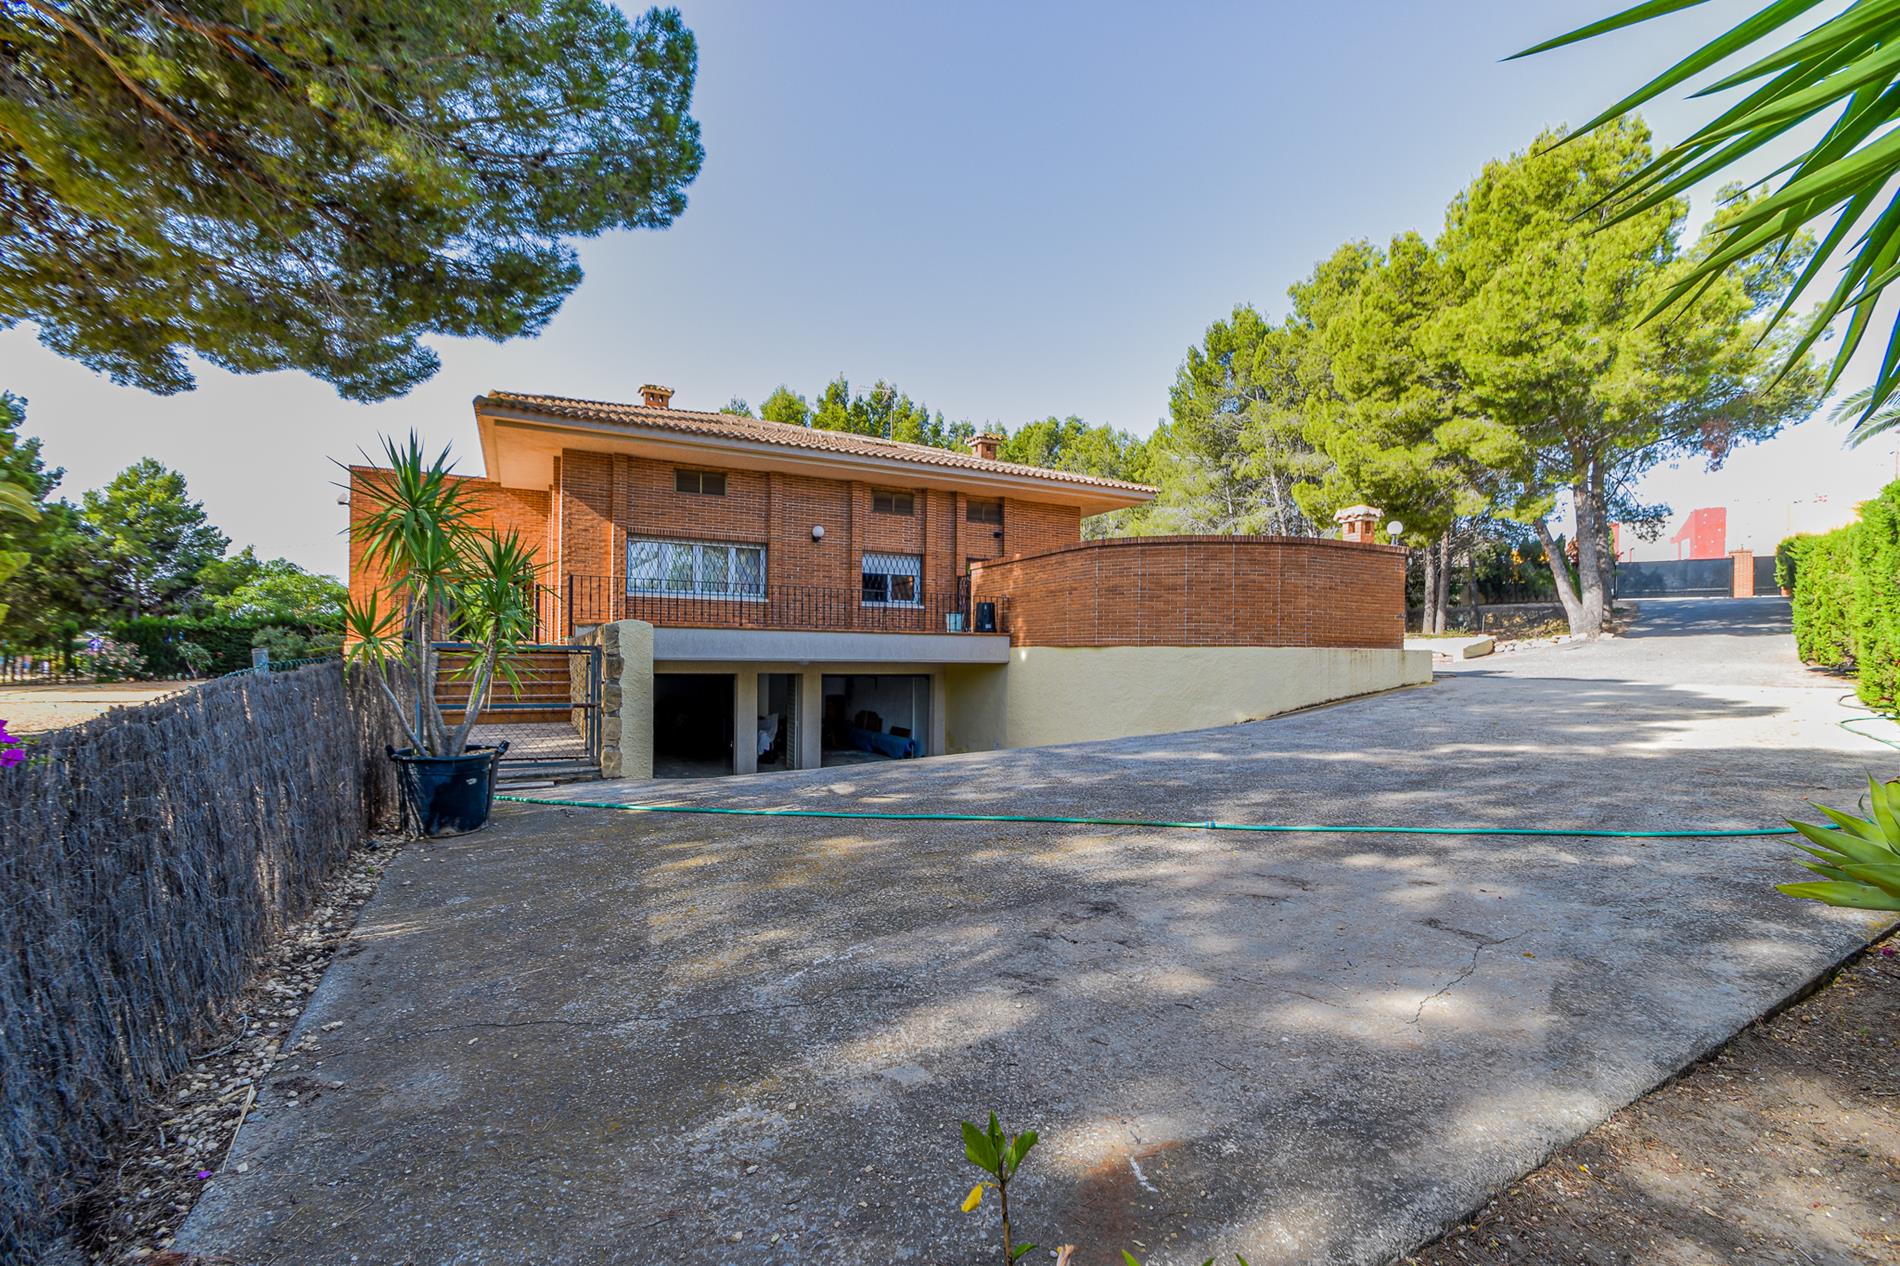 Villa for sale in La Nucia with large plot and spacious rooms